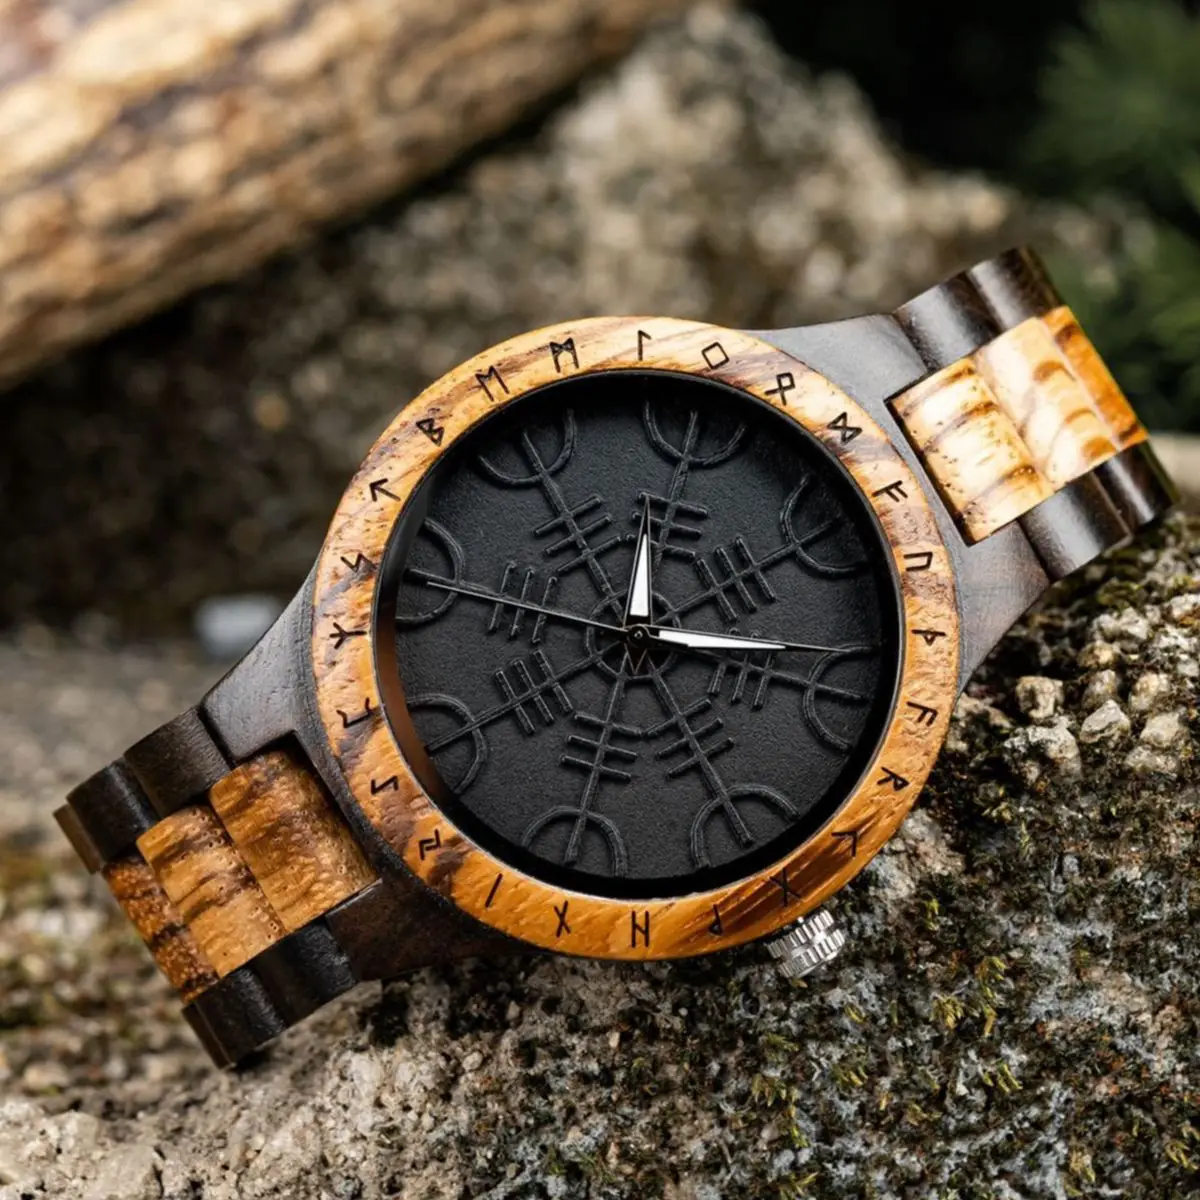 BOBO BIRD Wood Watches Relogio Masculino Watch for Men Viking Warriors Symbol Relojes Para Hombre часы мужские Logo Custom to my son carved content wood watch believ in yourself as much as i believe in you love mom